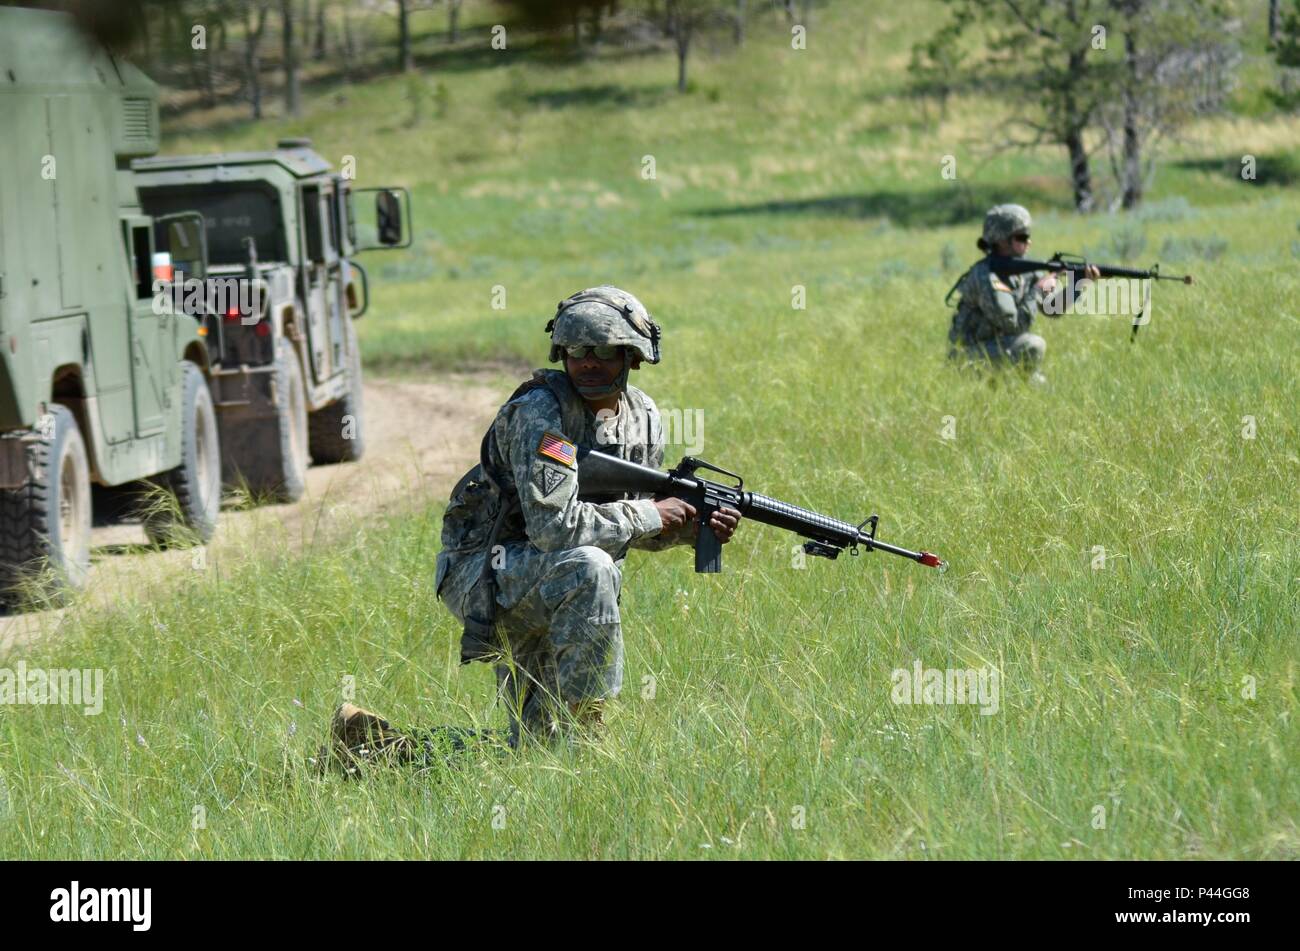 U.S. Army Staff Sgt. Kelvin Jones-Owes of the 396th Medical Company (Ground Ambulance), Army Reserve, provides security during a simulated convoy ambush in support of the Golden Coyote exercise in Camp Guernsey, Wyo., June 15th, 2016. The Golden Coyote exercise is a three-phase, scenario-driven exercise conducted in the Black Hills of South Dakota and Wyoming, which enables commanders to focus on mission essential task requirements, warrior tasks and battle drills. (U.S. Army photo by Pfc. Michael Britt/Released) Stock Photo